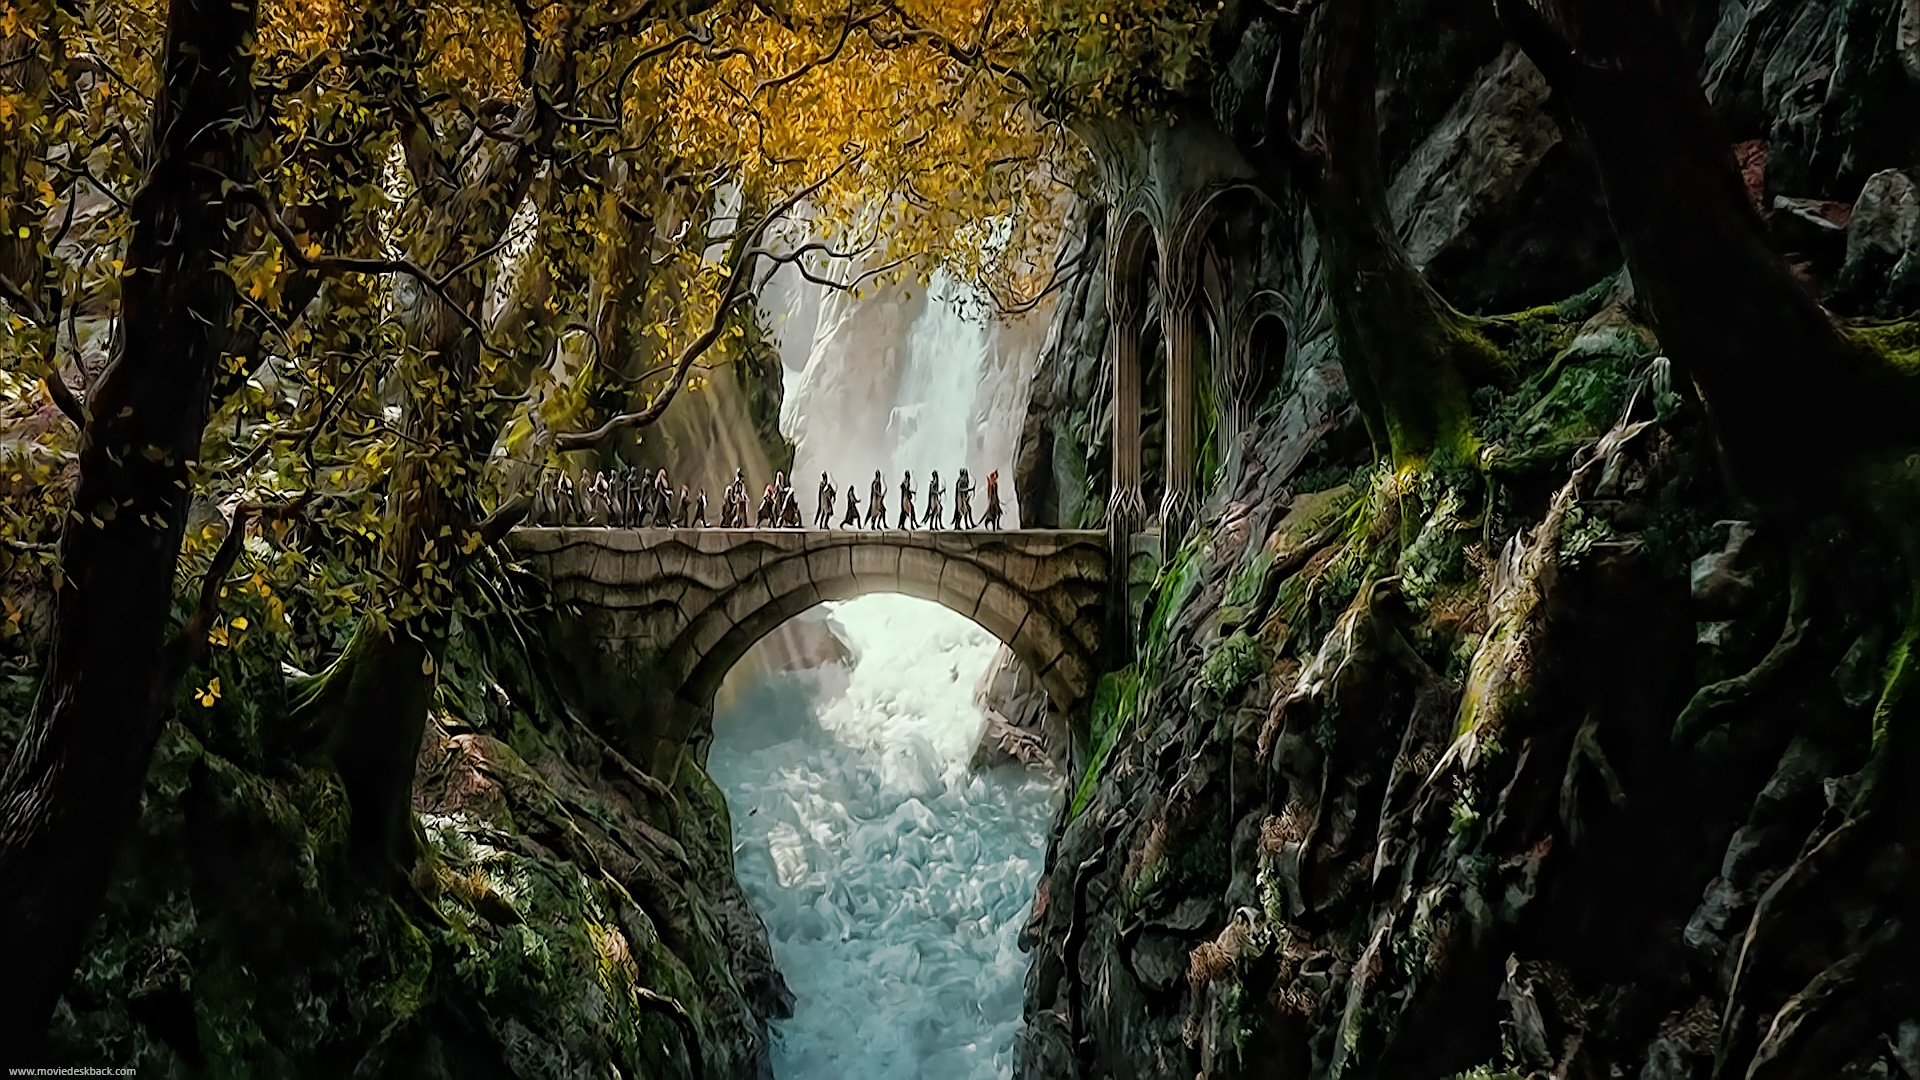 The Hobbit The Battle of The Five Armies Angry Smaug HD Wallpaper The Hobbit Pinterest Hobbit, Hd wallpaper and Army